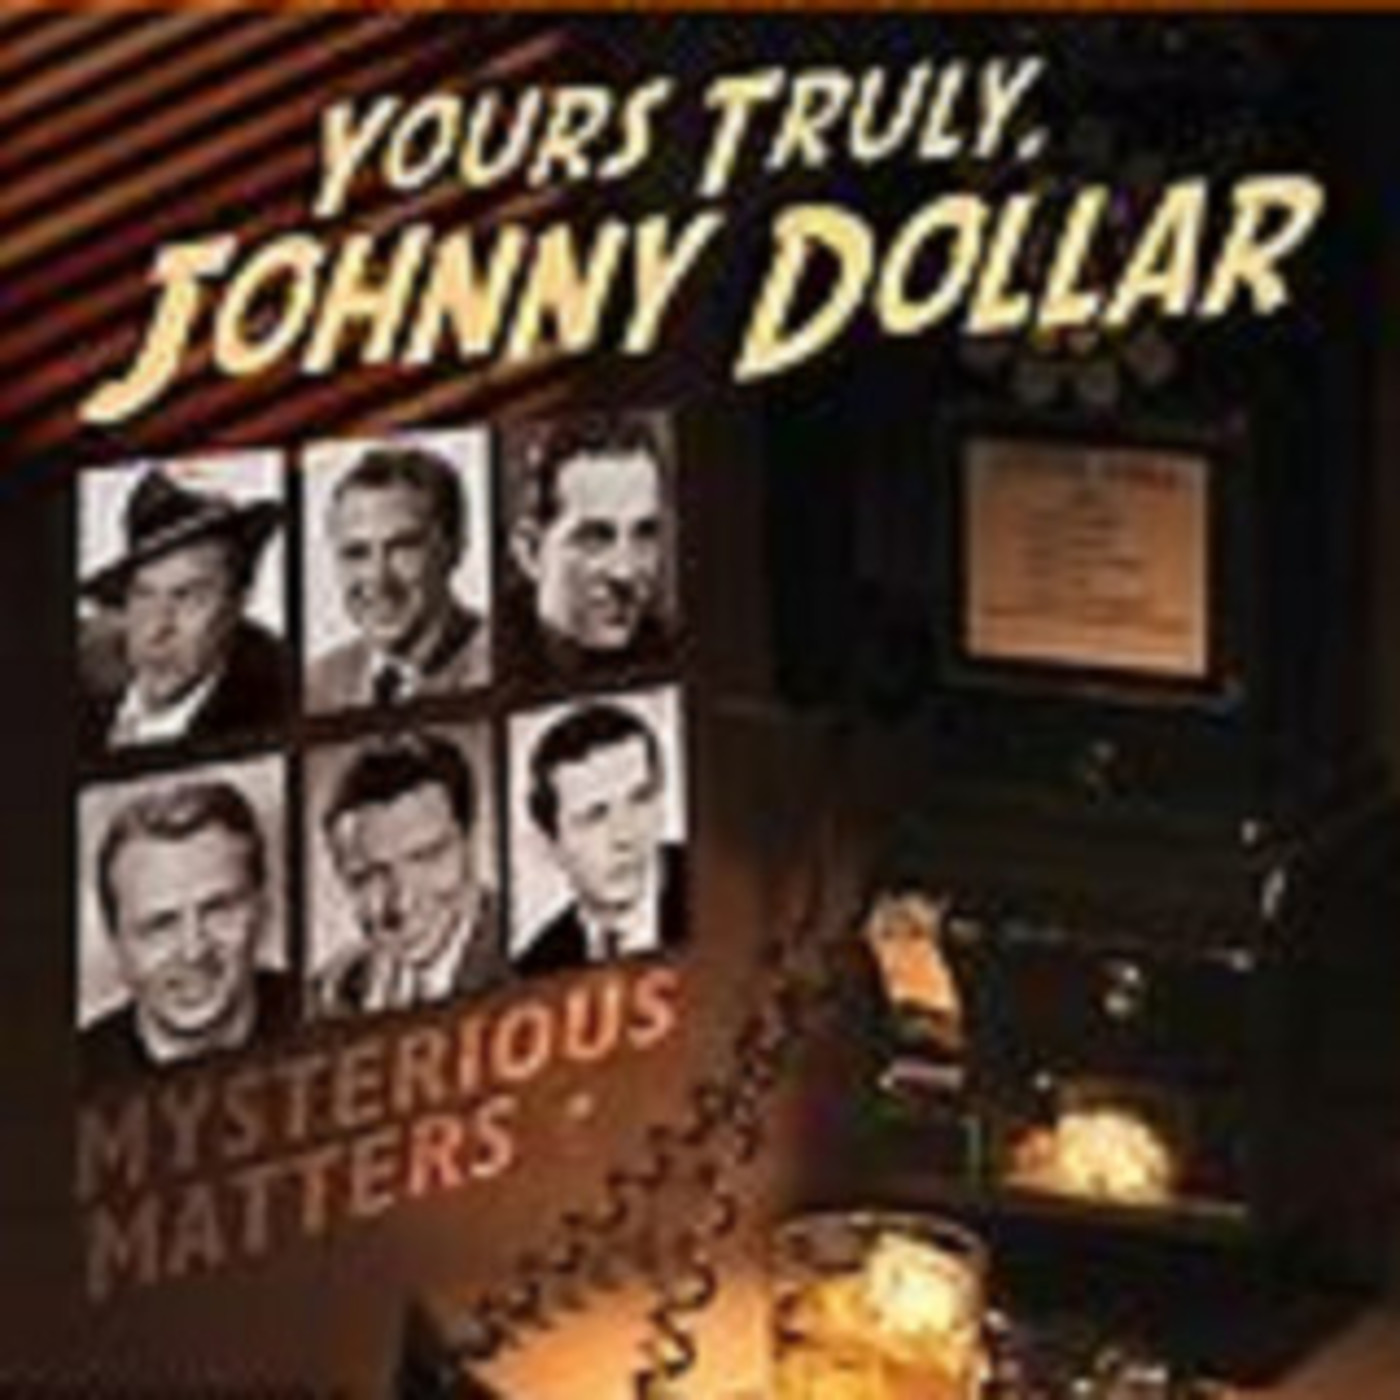 Yours Truly, Johnny Dollar - 050662, episode 790 - The Burma Red Matter